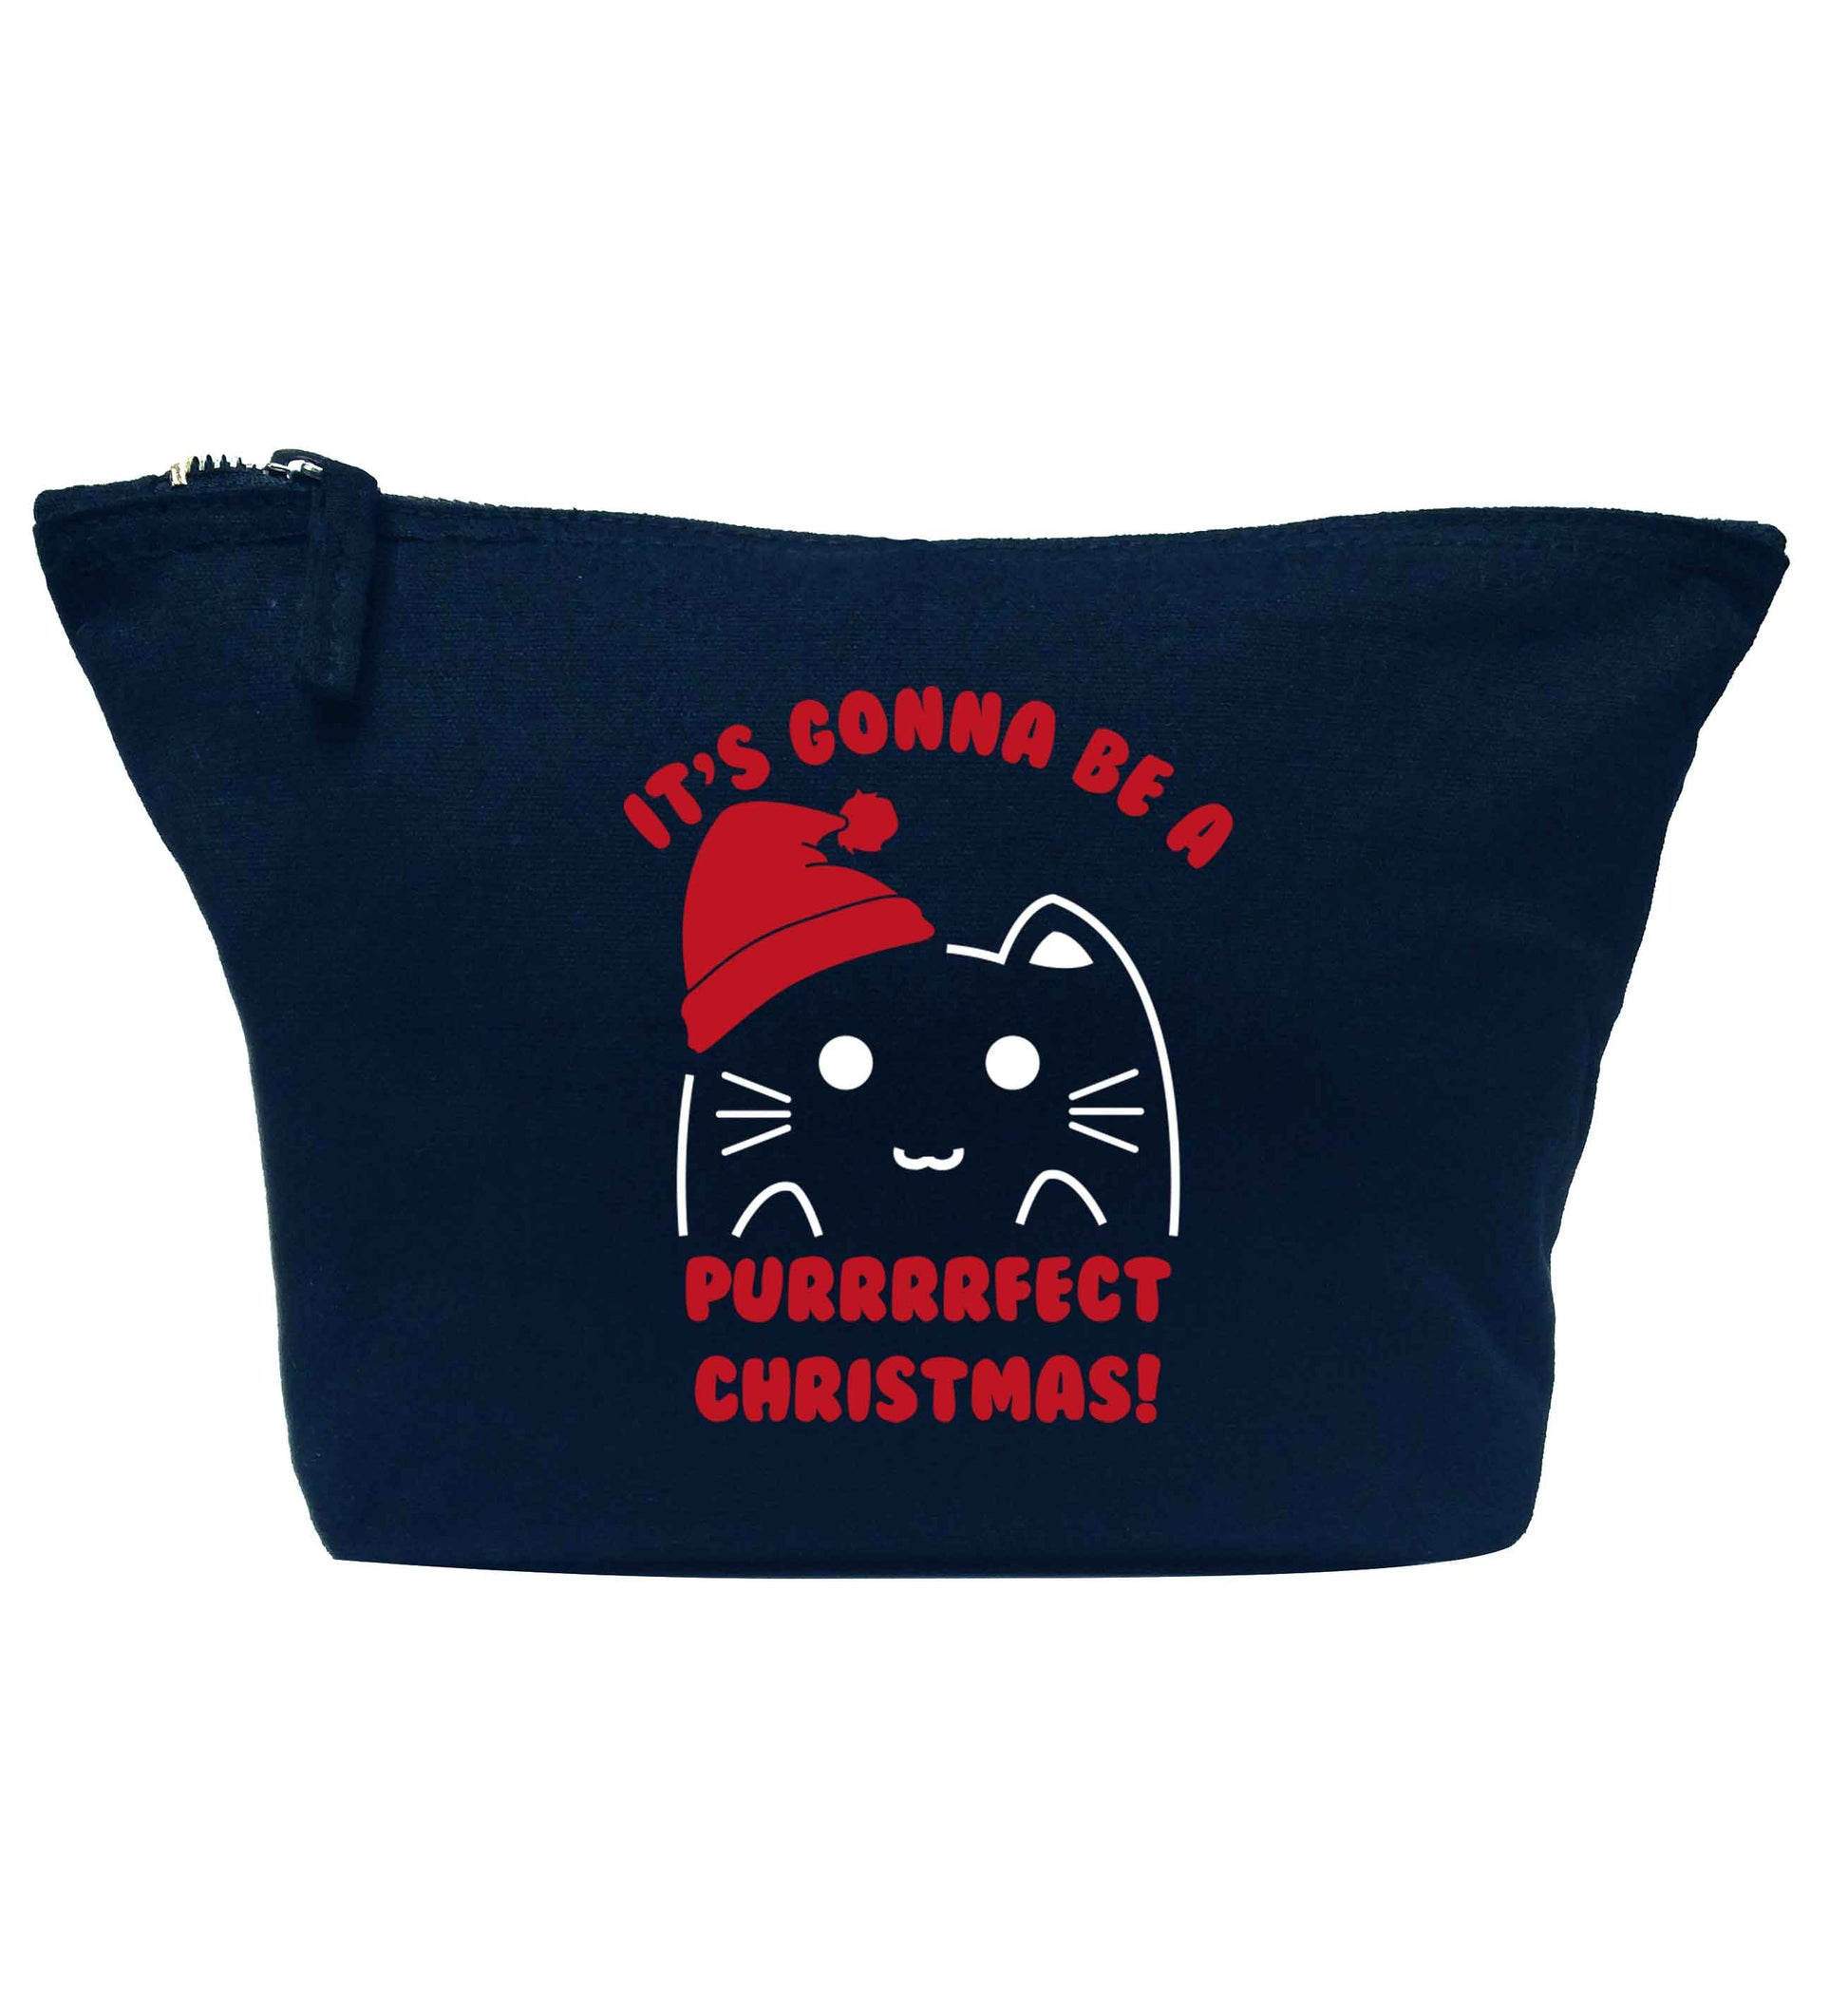 It's going to be a purrfect Christmas navy makeup bag